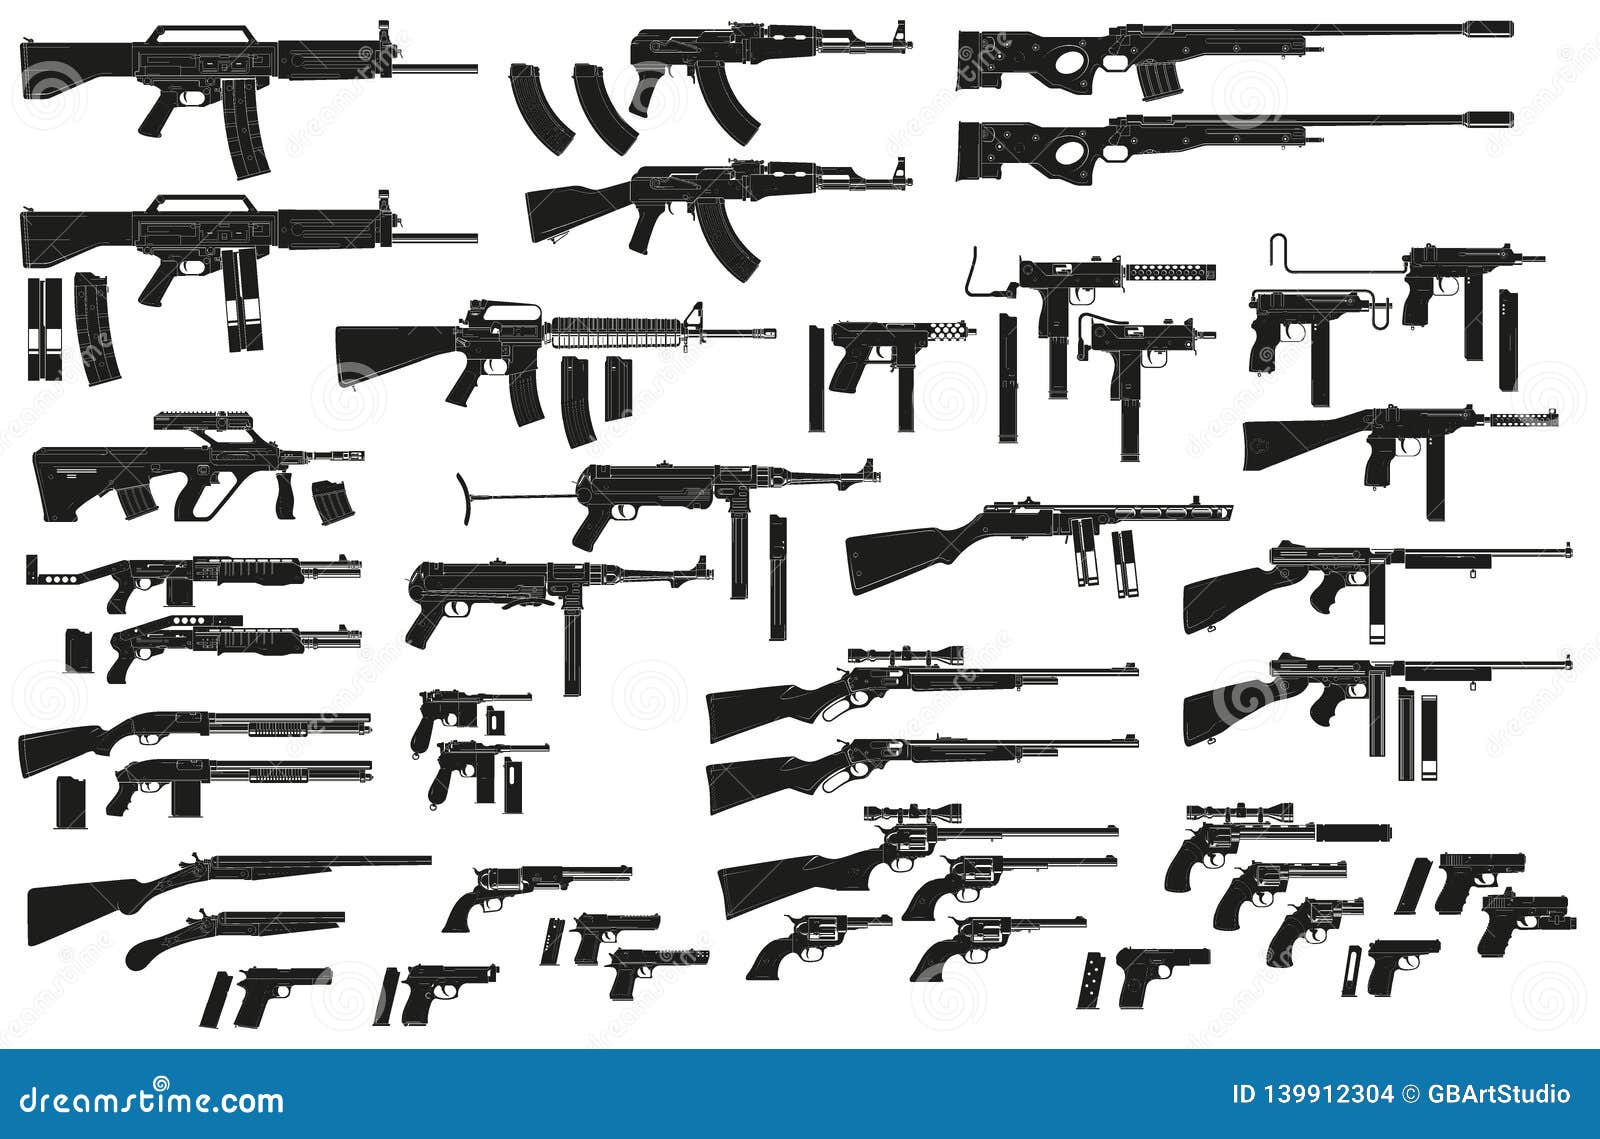 graphic black silhouette weapon and firearm icons